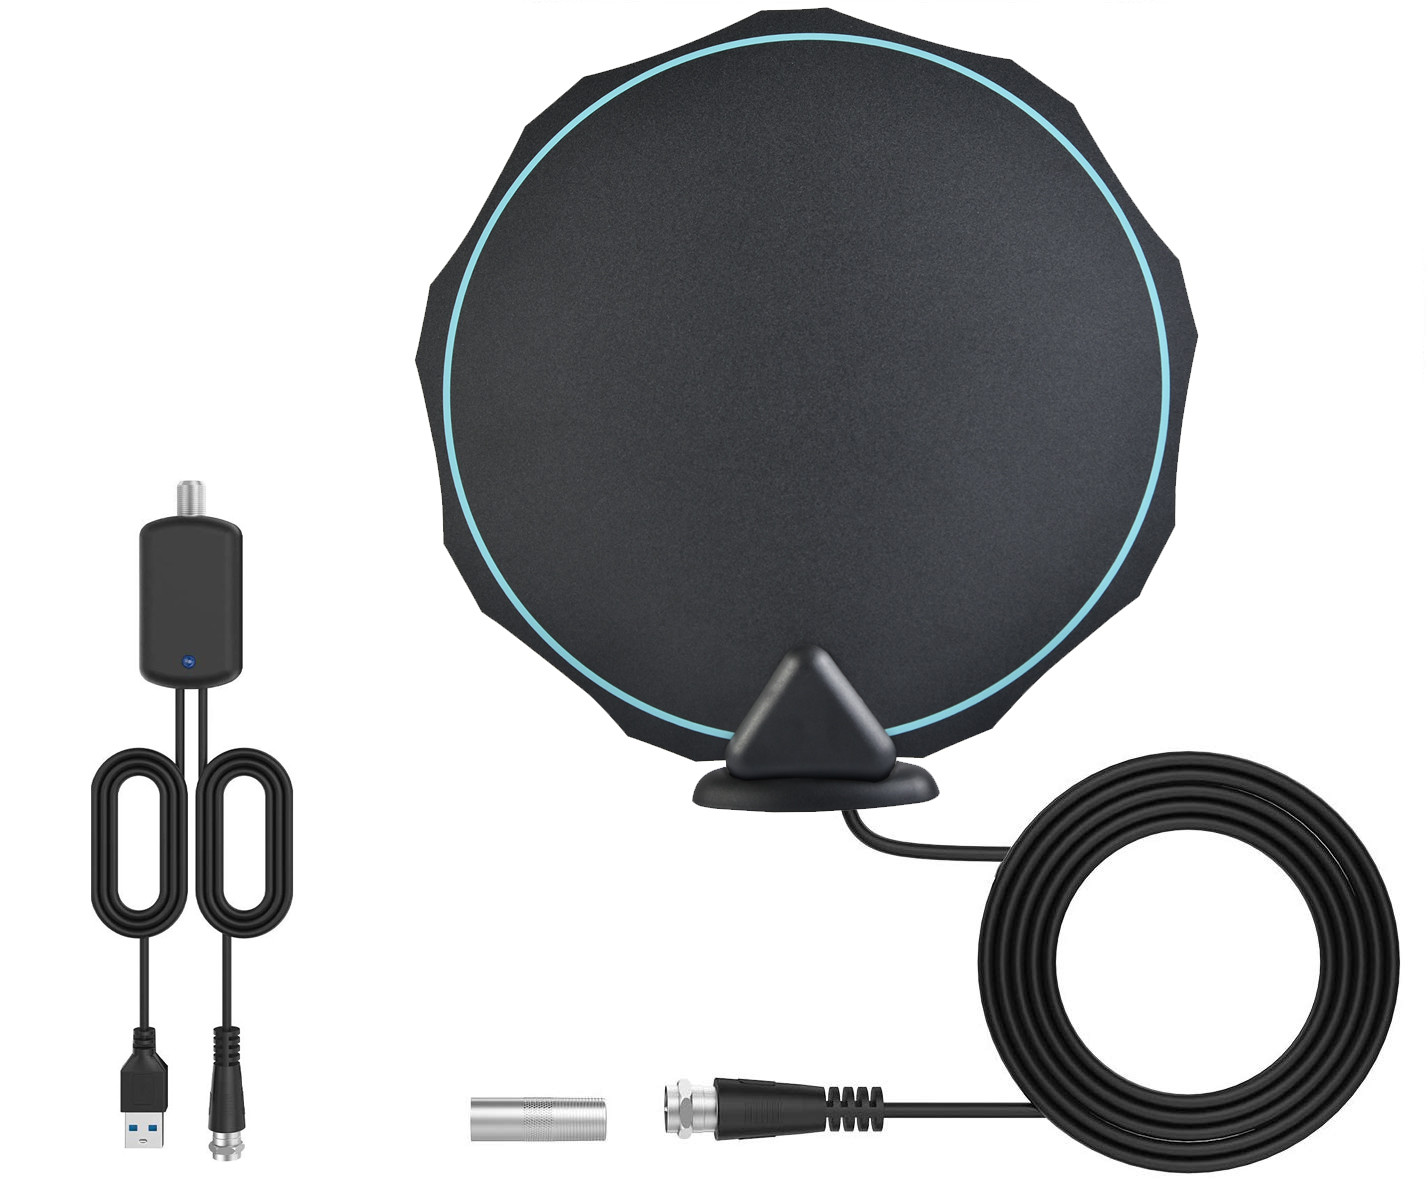  Amplified HD 28dBi 230 Miles Indoor TV Antenna 5m Cable Manufactures